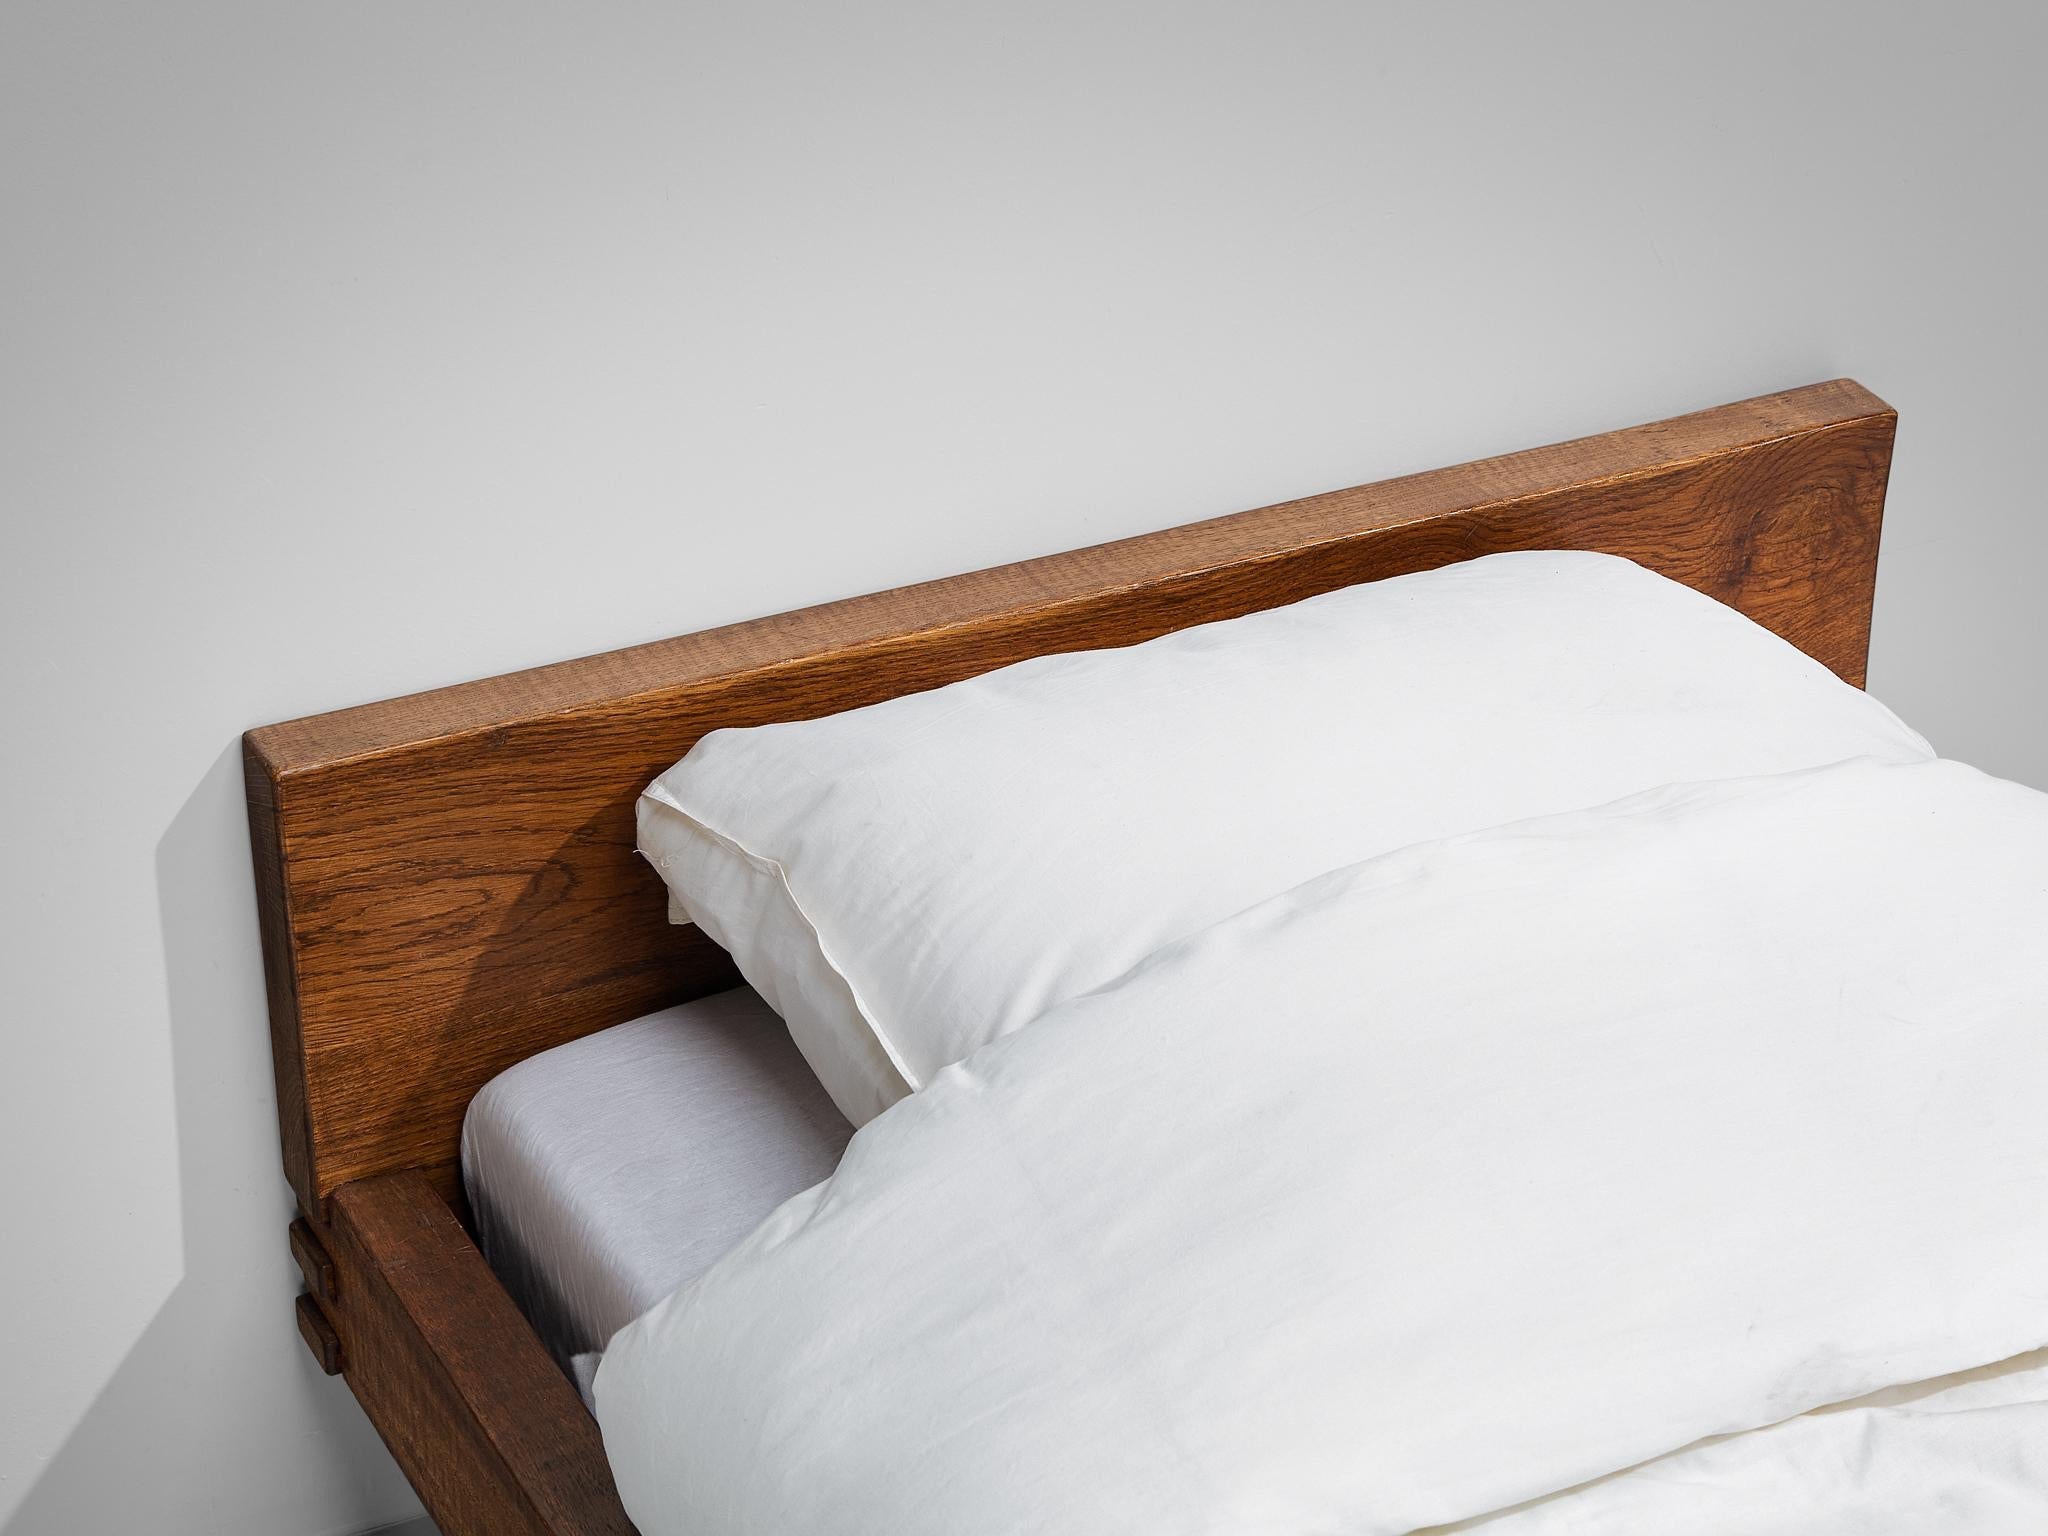 Giuseppe Rivadossi for Officina Rivadossi Single Bed in Walnut